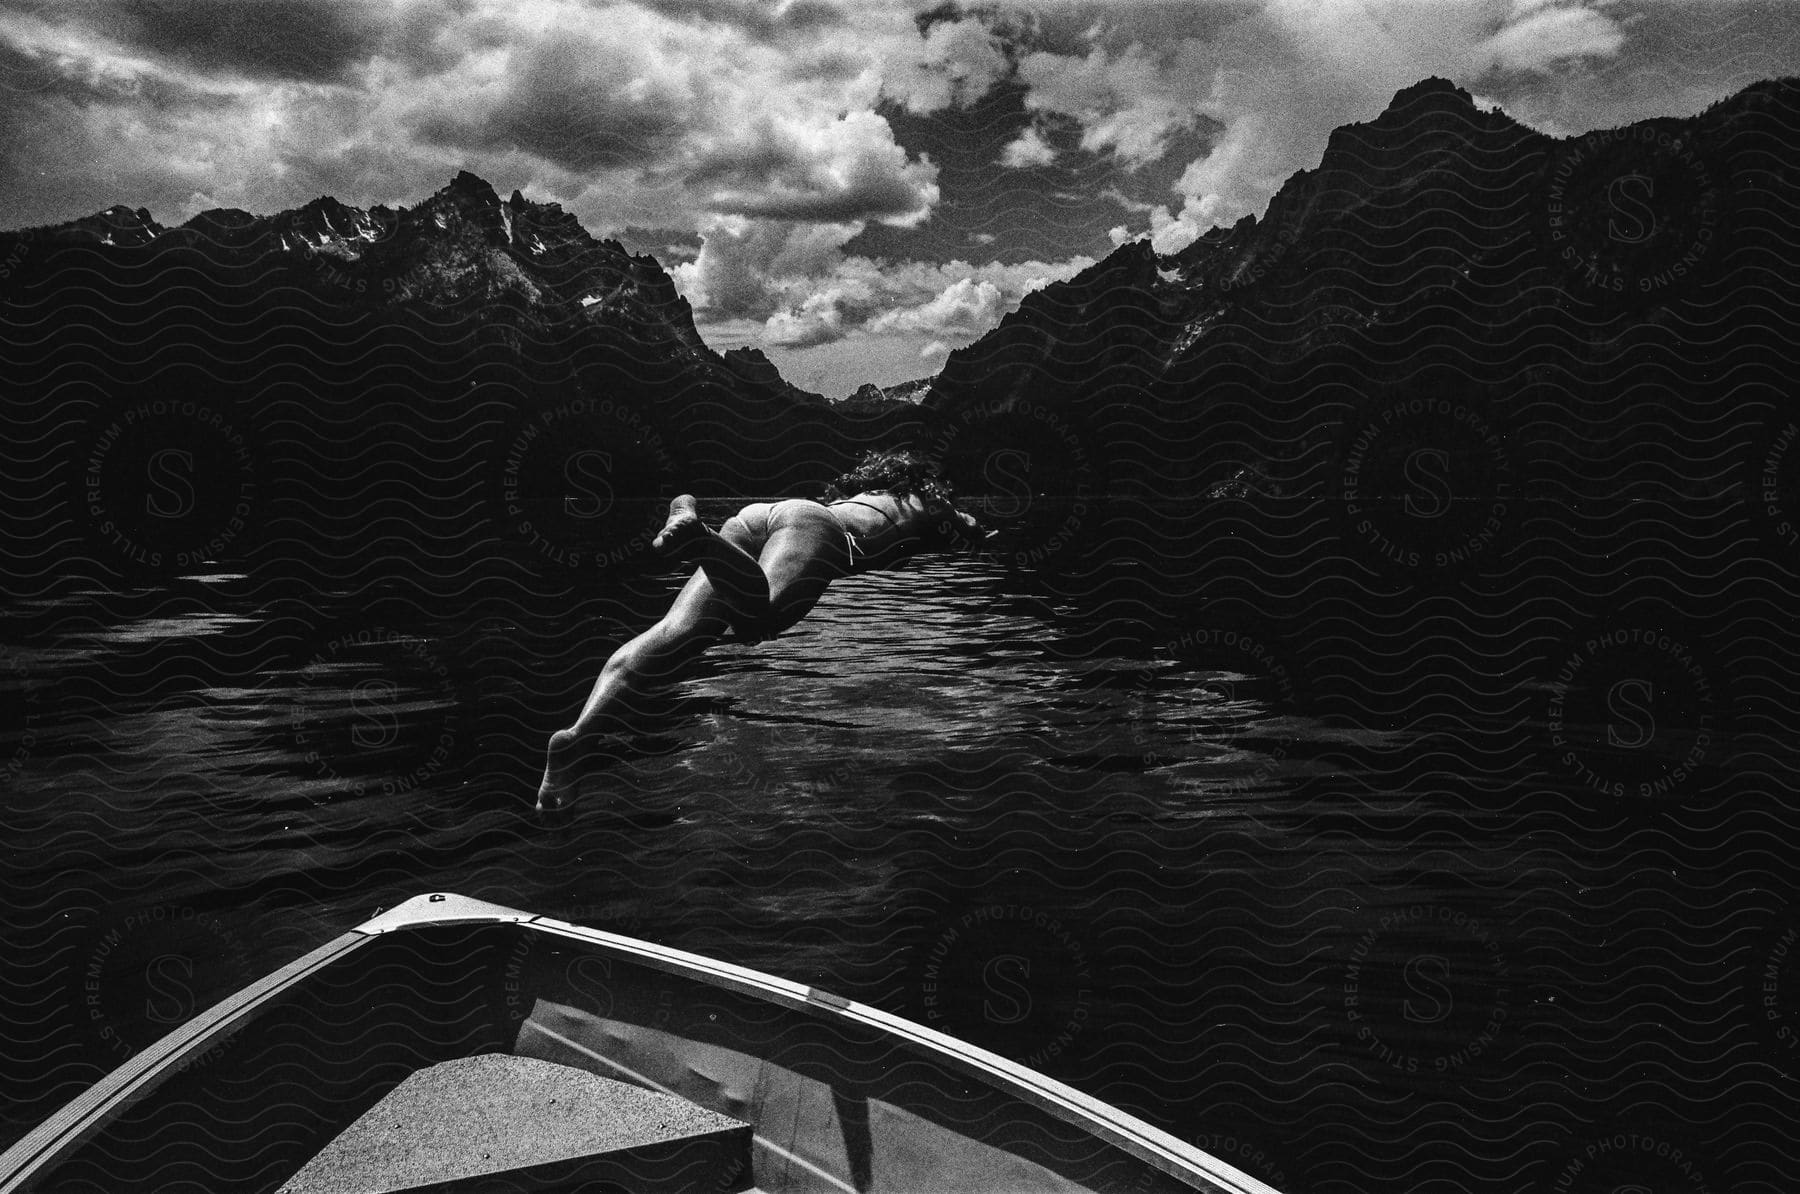 A woman diving off a small boat into a lake.